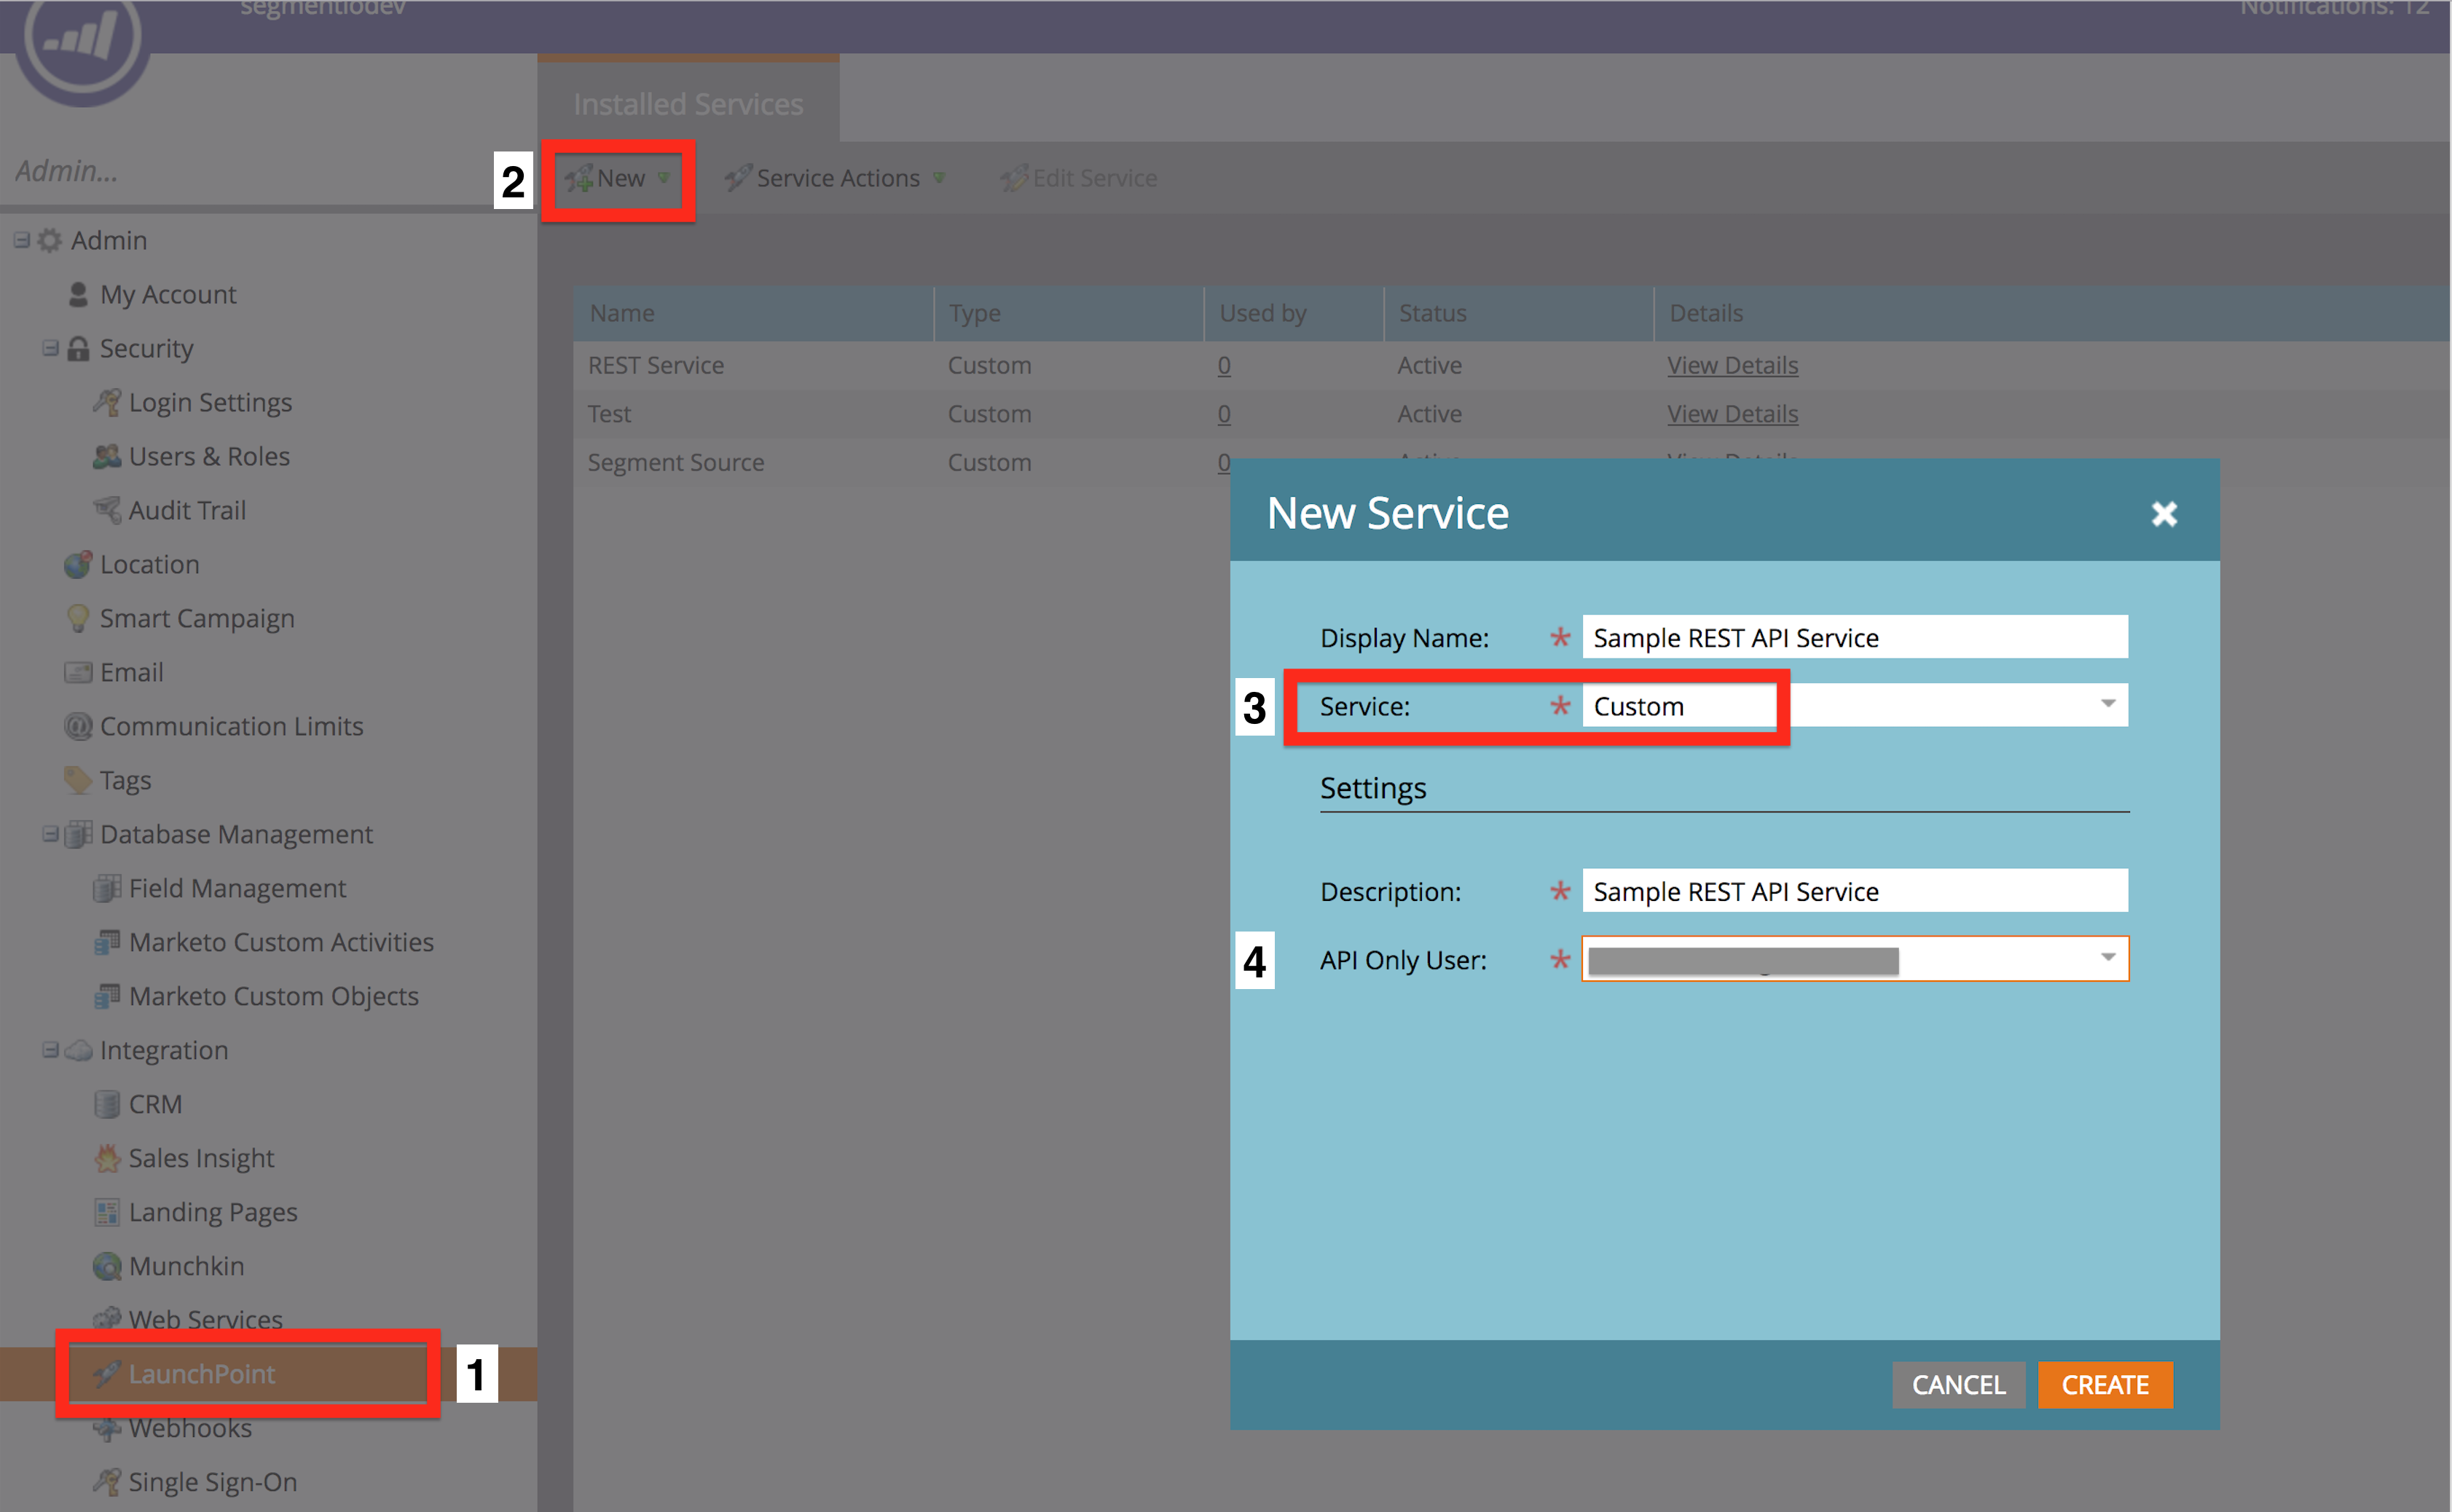 A screenshot of the New Service popup in Marketo.